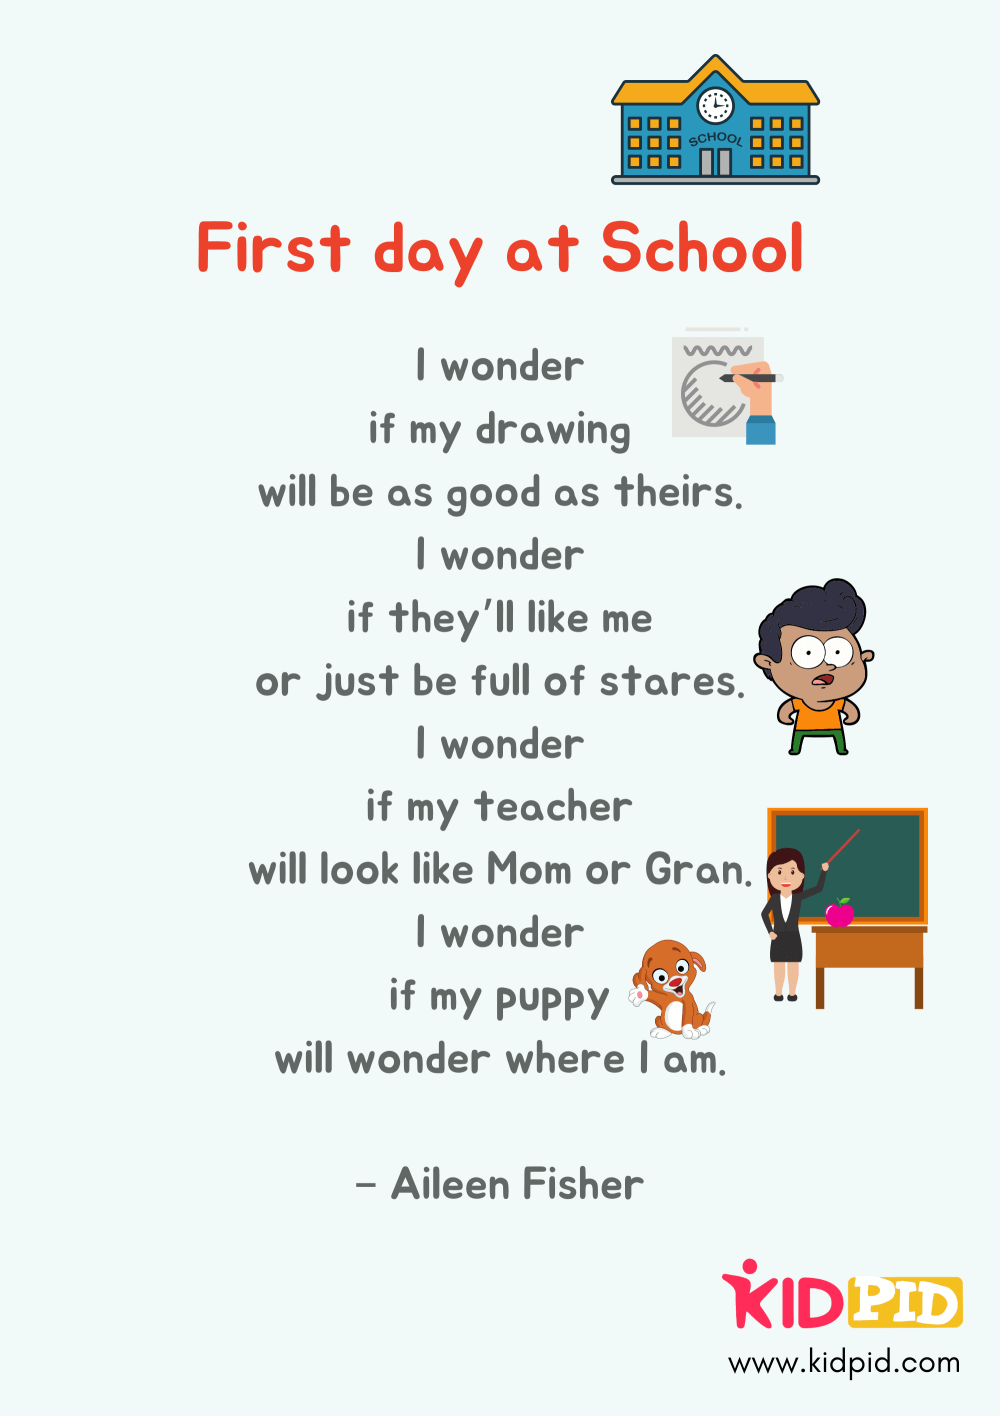 First Day At School Class 2 Poem Kidpid